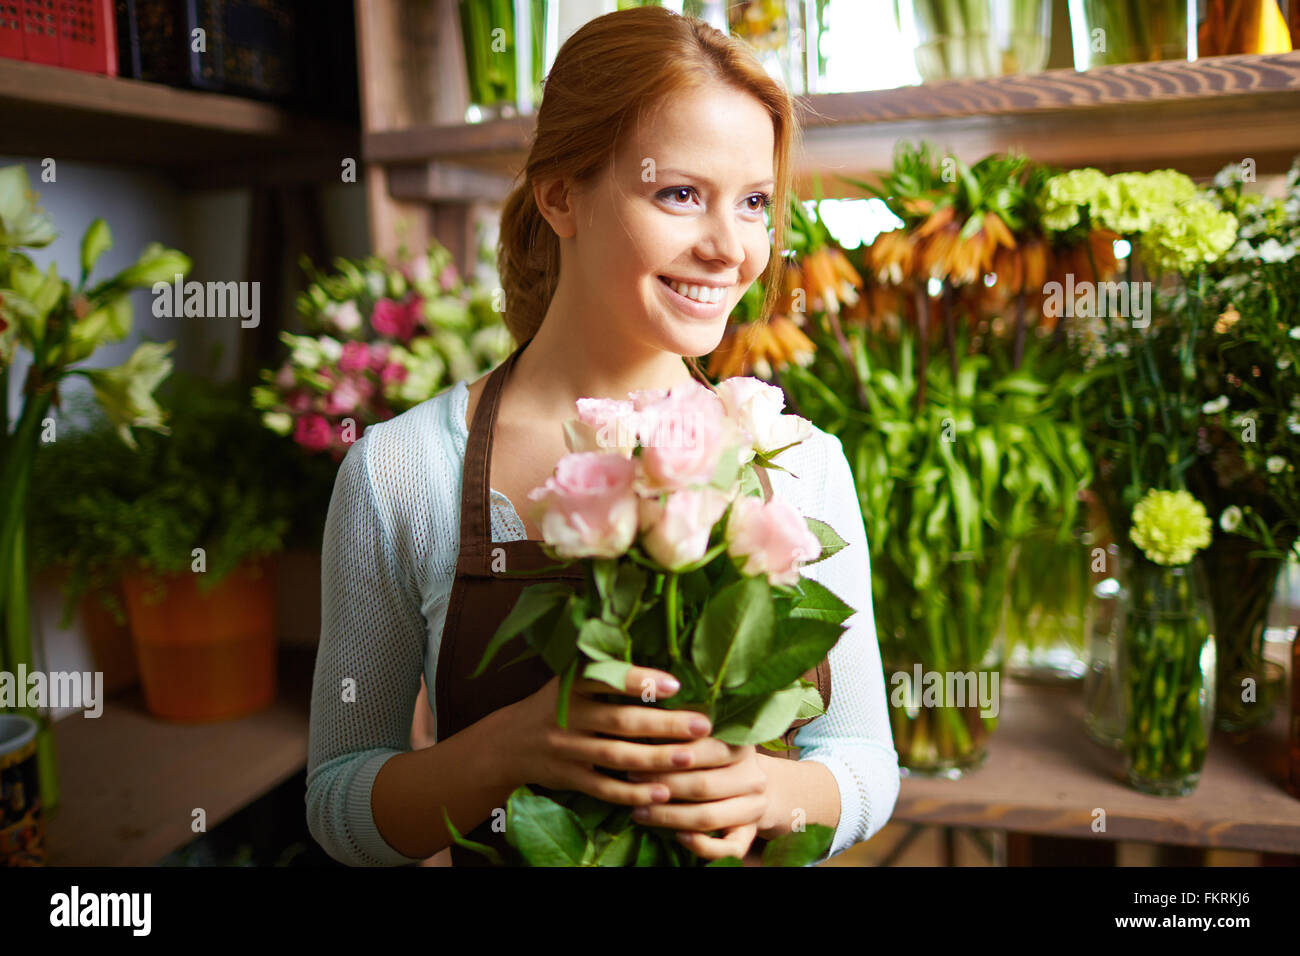 Portrait of Pretty woman working in flower shop Banque D'Images